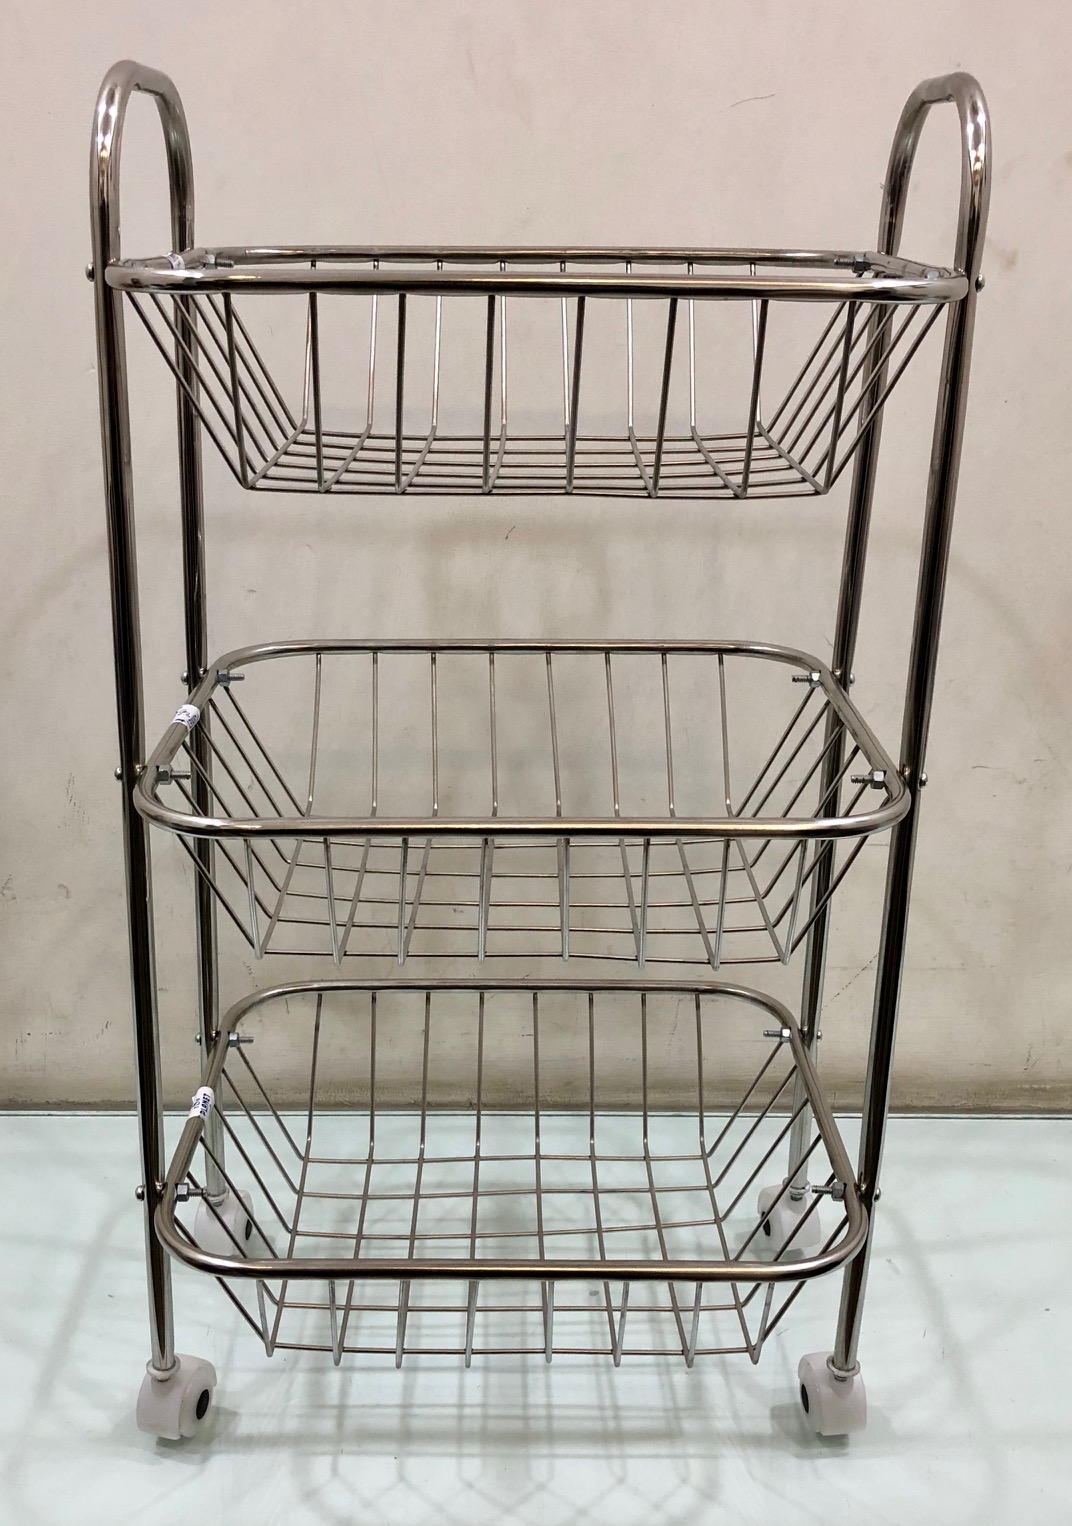 ROUND PIPE TROLLEY 3NO (A)